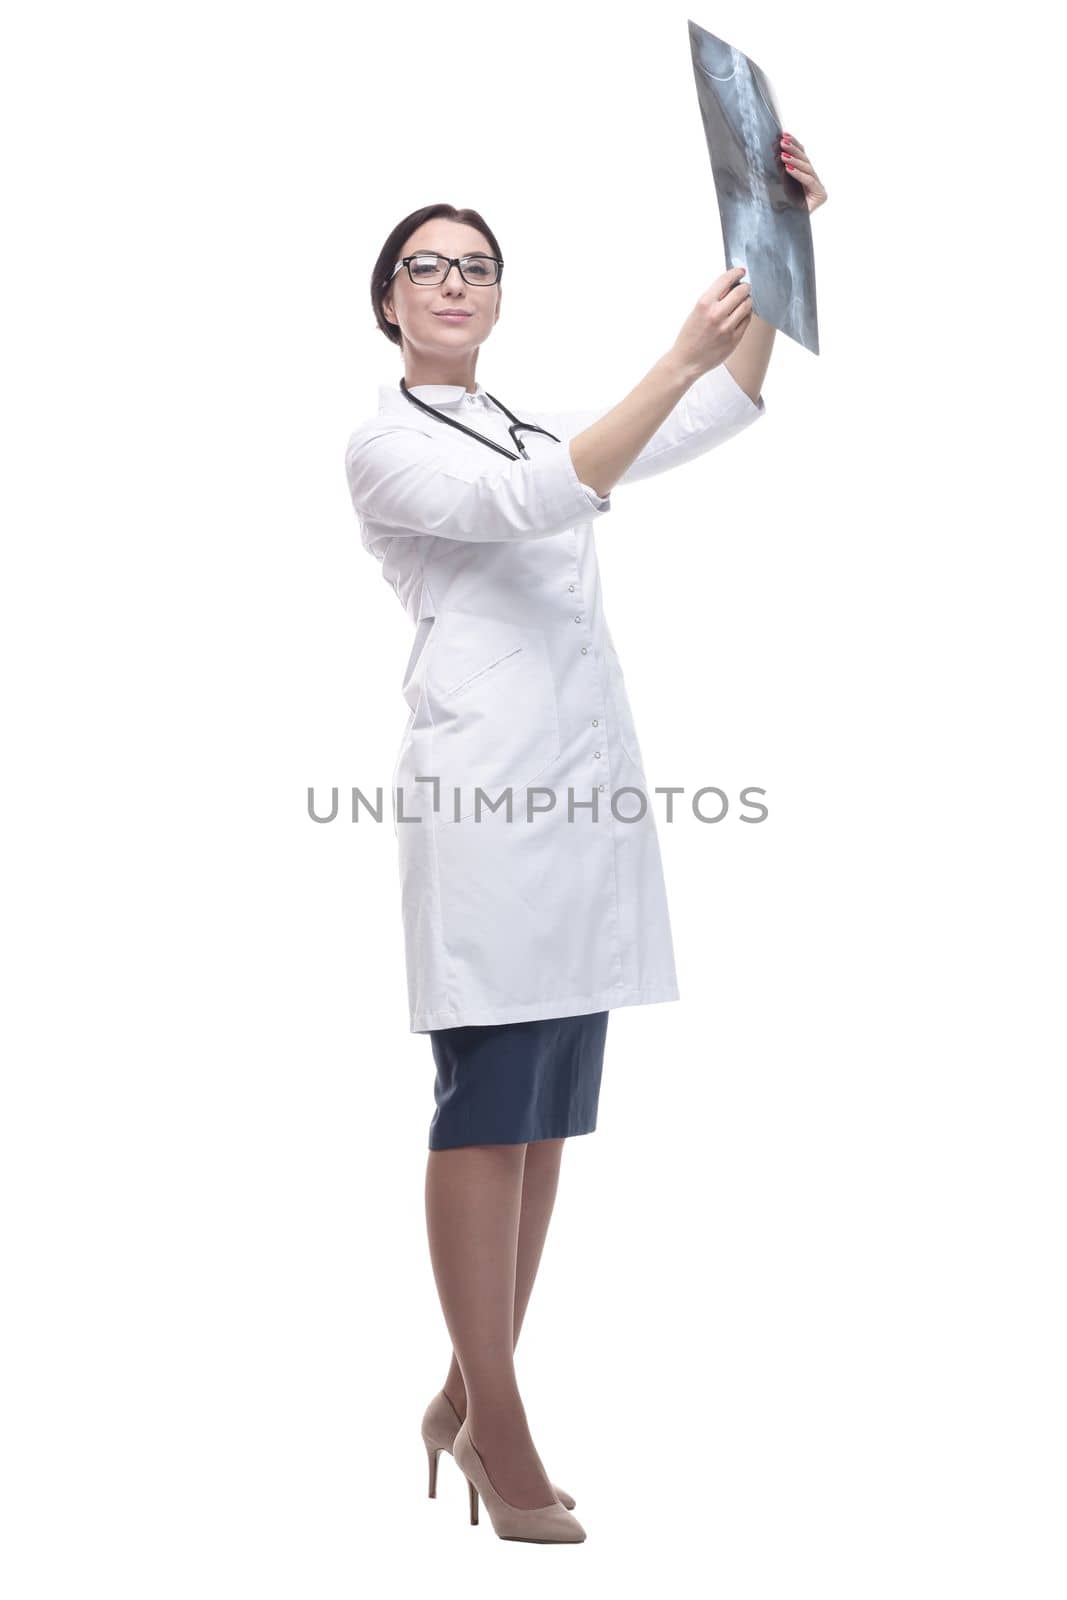 in full growth. woman doctor with an x-ray in her hands. isolated on a white background.